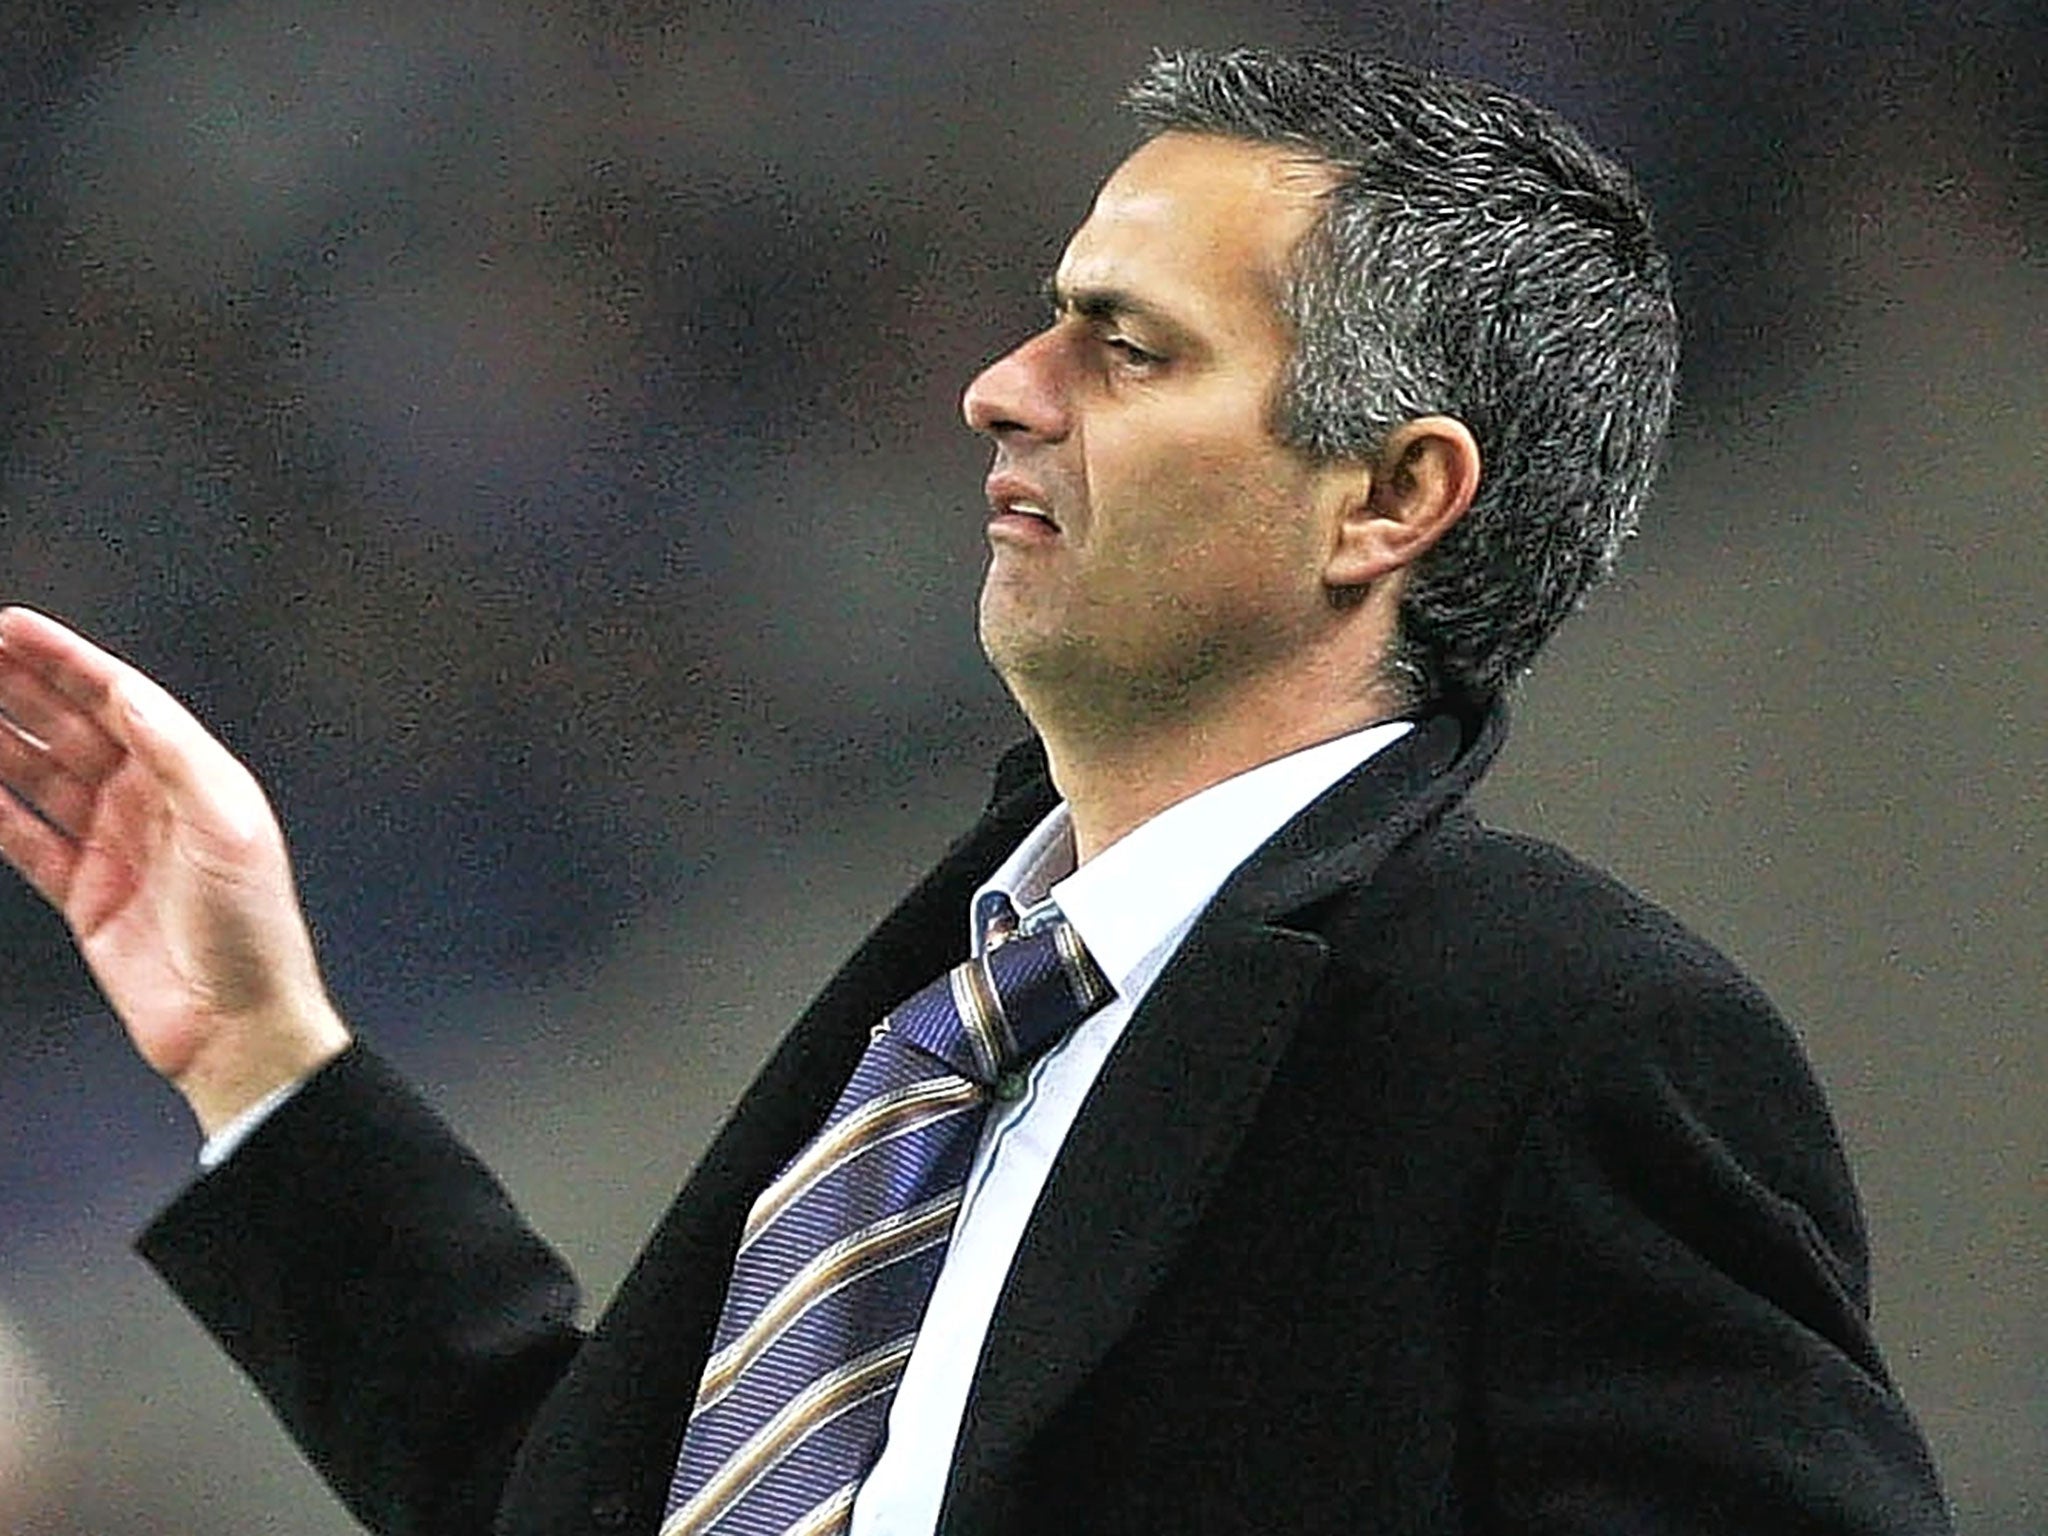 Jose Mourinho back in 2004. He upset people then – and still does